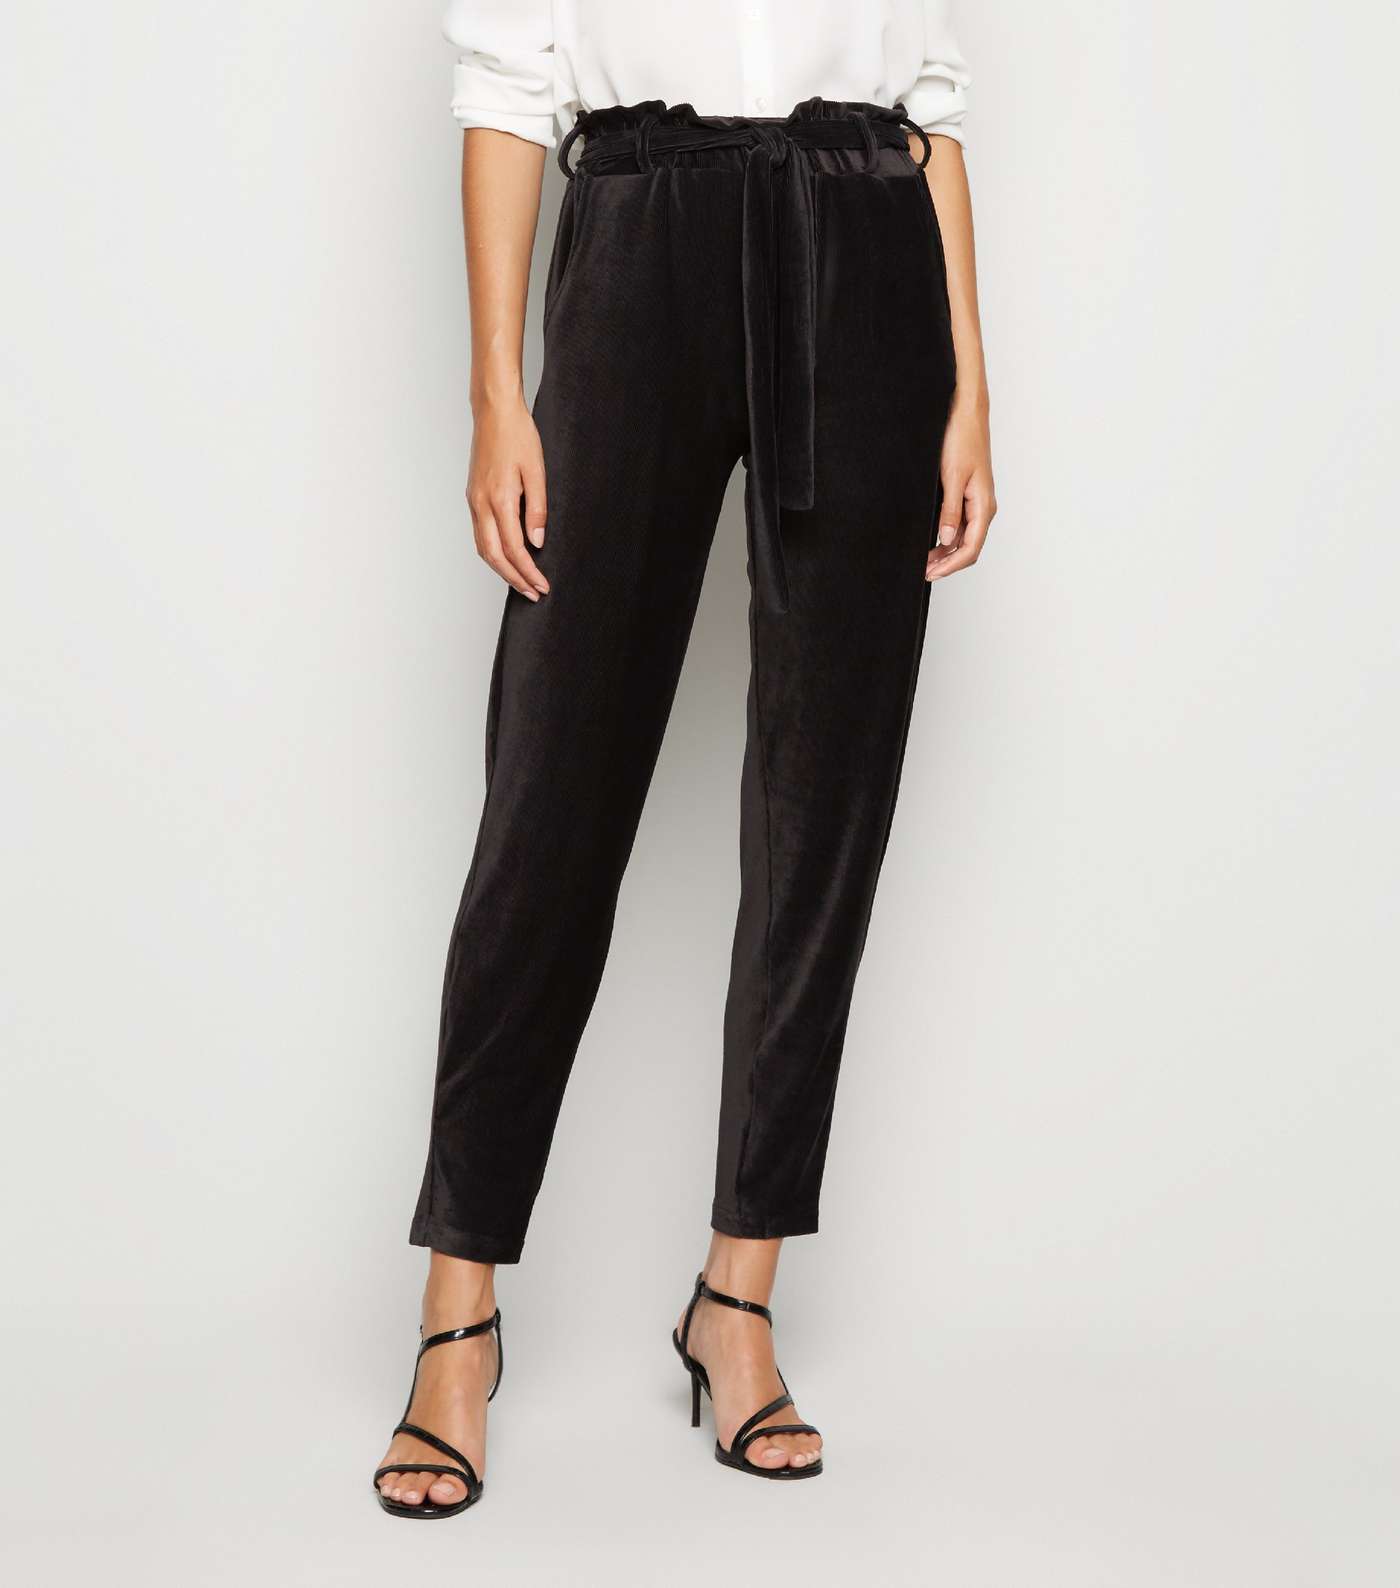 Blue Vanilla Black Corduroy Soft Touch Trousers Image 2